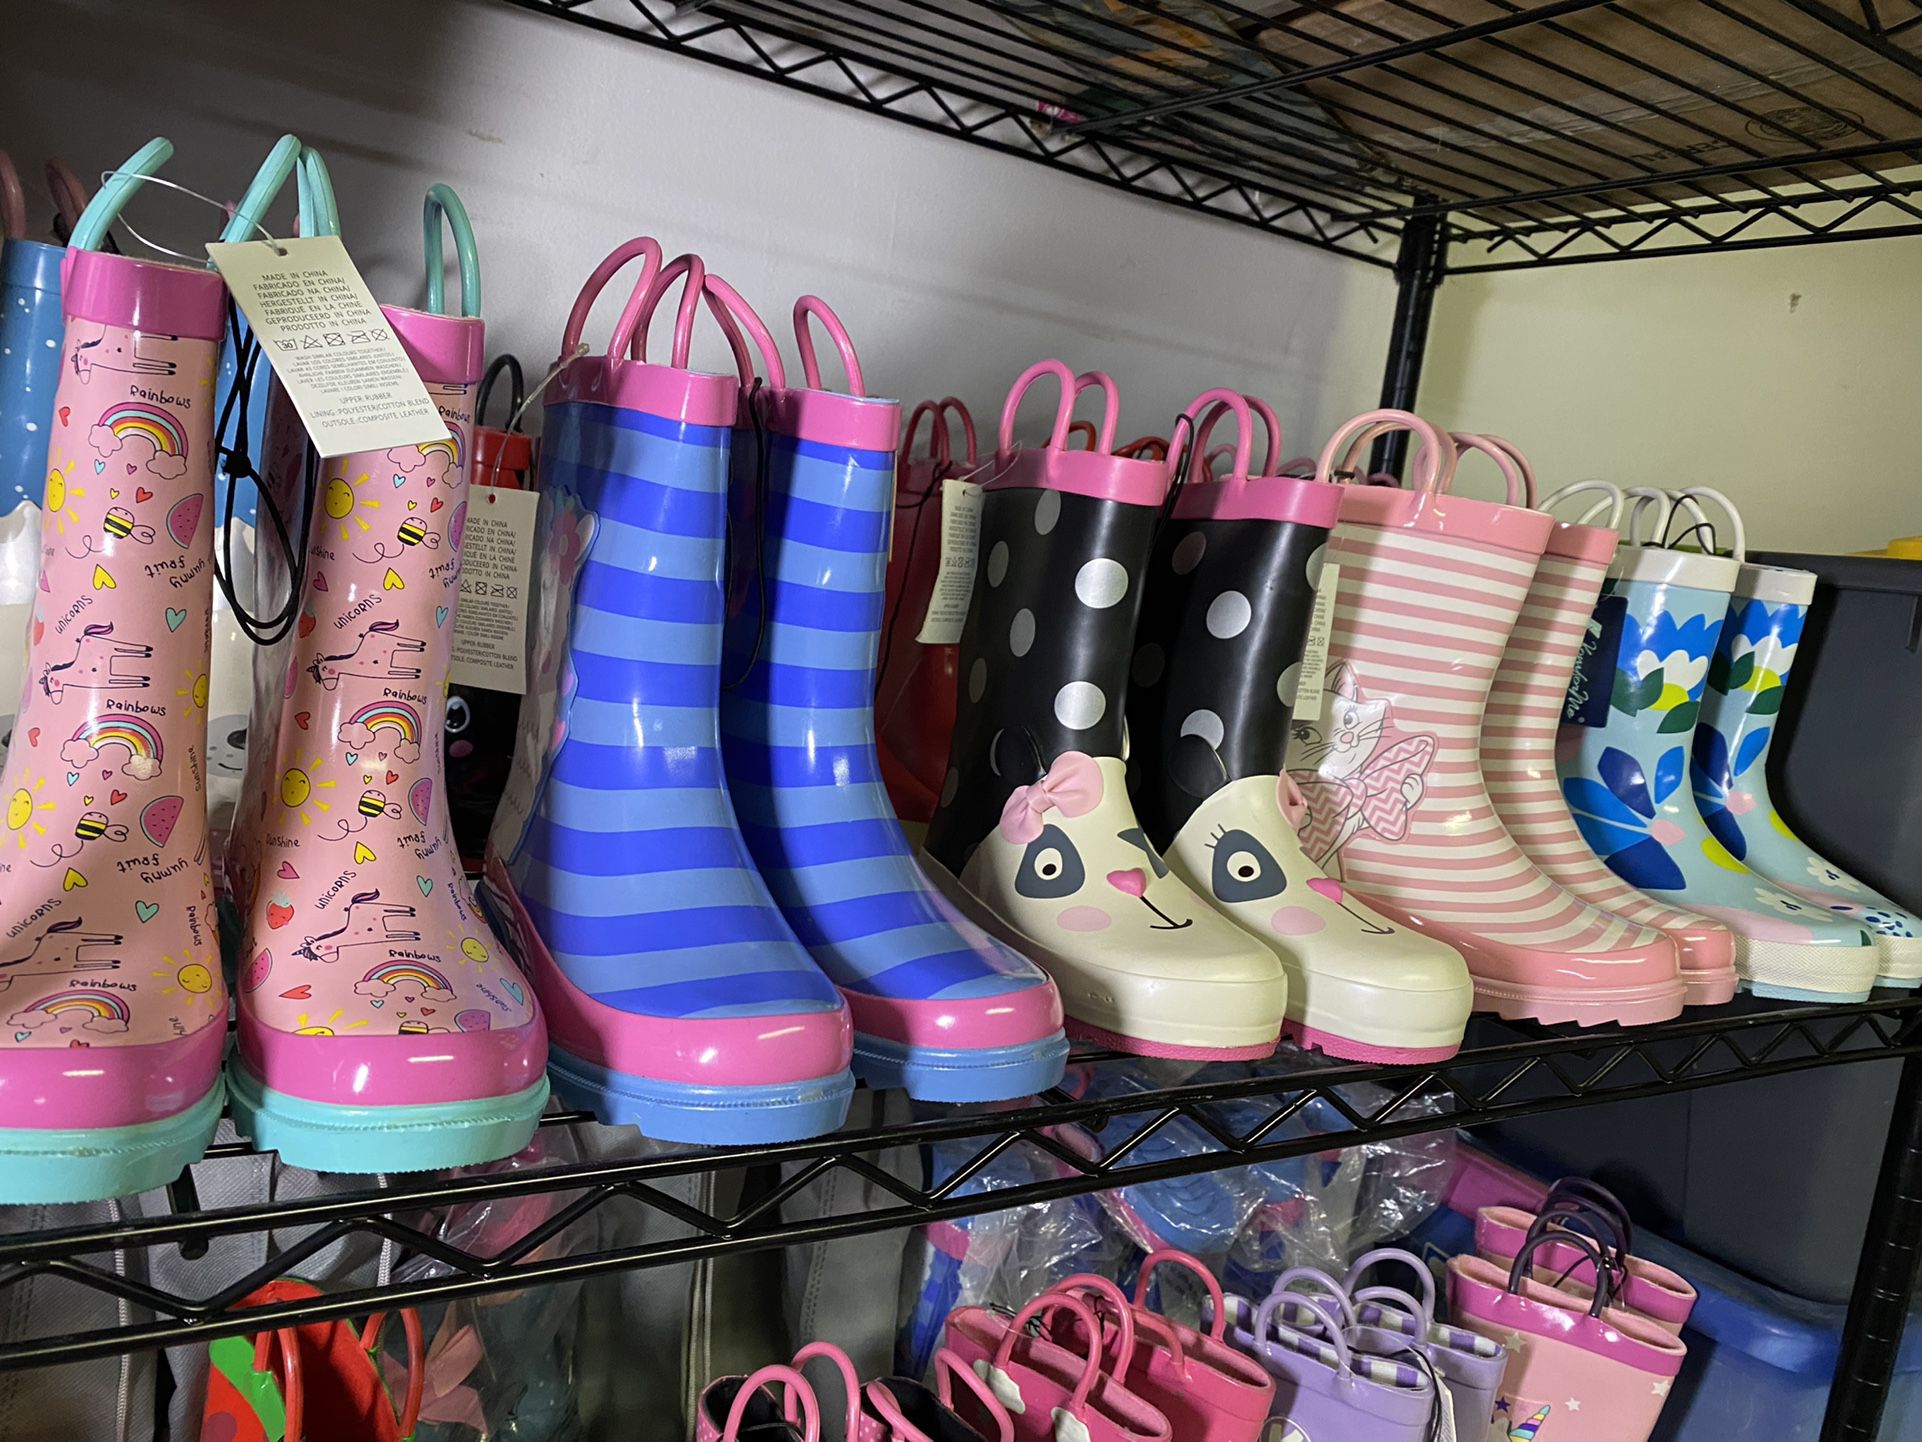 New Rain Boots For Girls And Boys Only Size 5 For Toddlers .